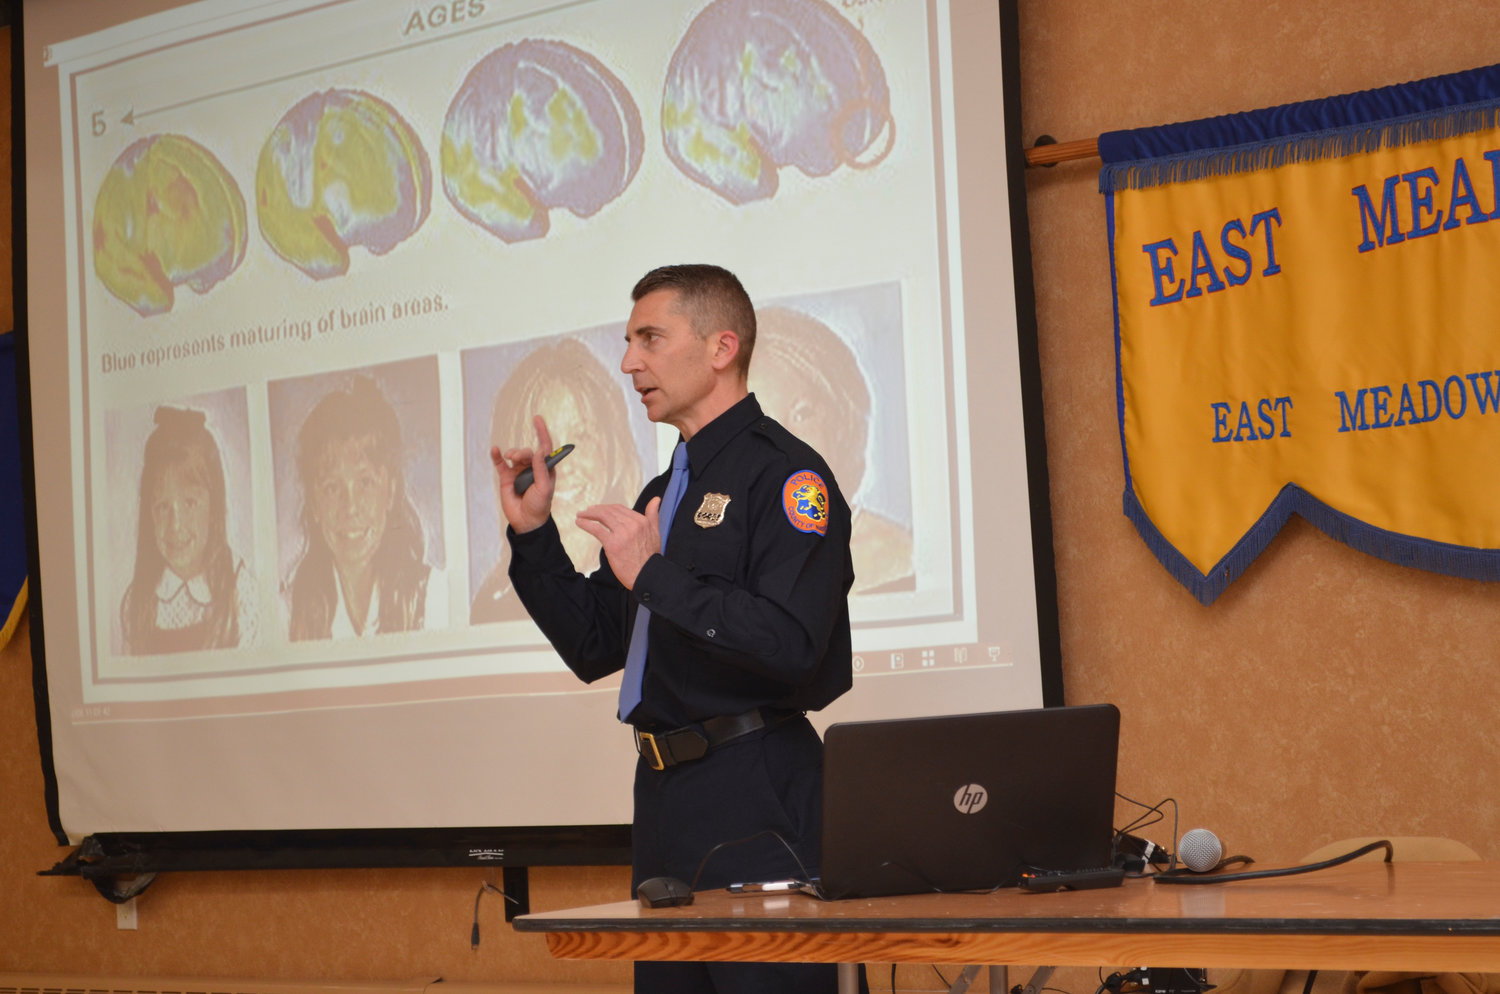 Police Officer John Obert-Thorn led the discussion on drugs and how to stay safe on April 28.